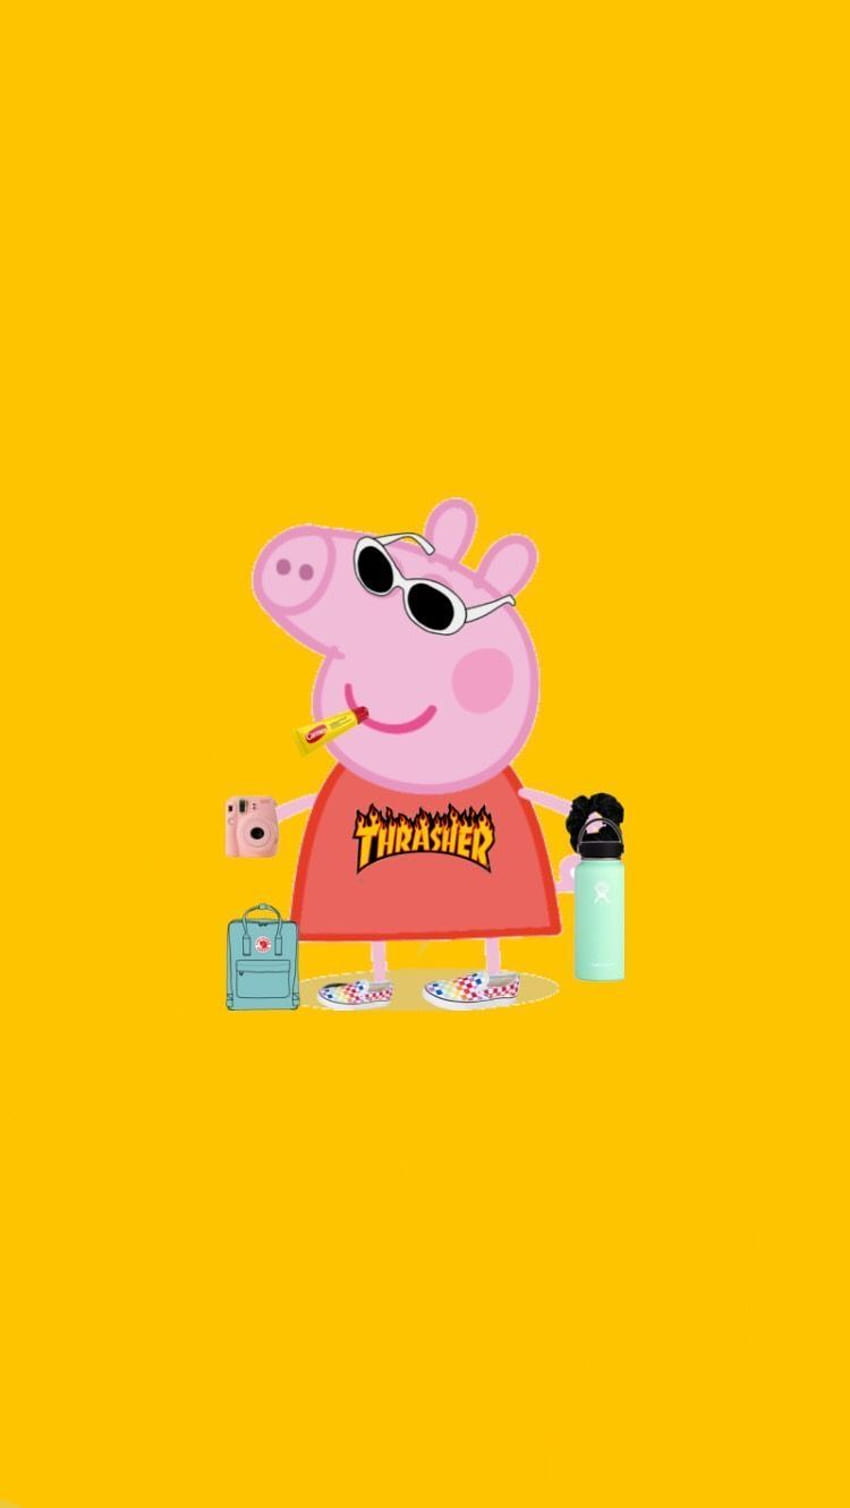 J.L on Aesthetically pleasing to me;), peppa pig vsco girl and billie eilish HD phone wallpaper